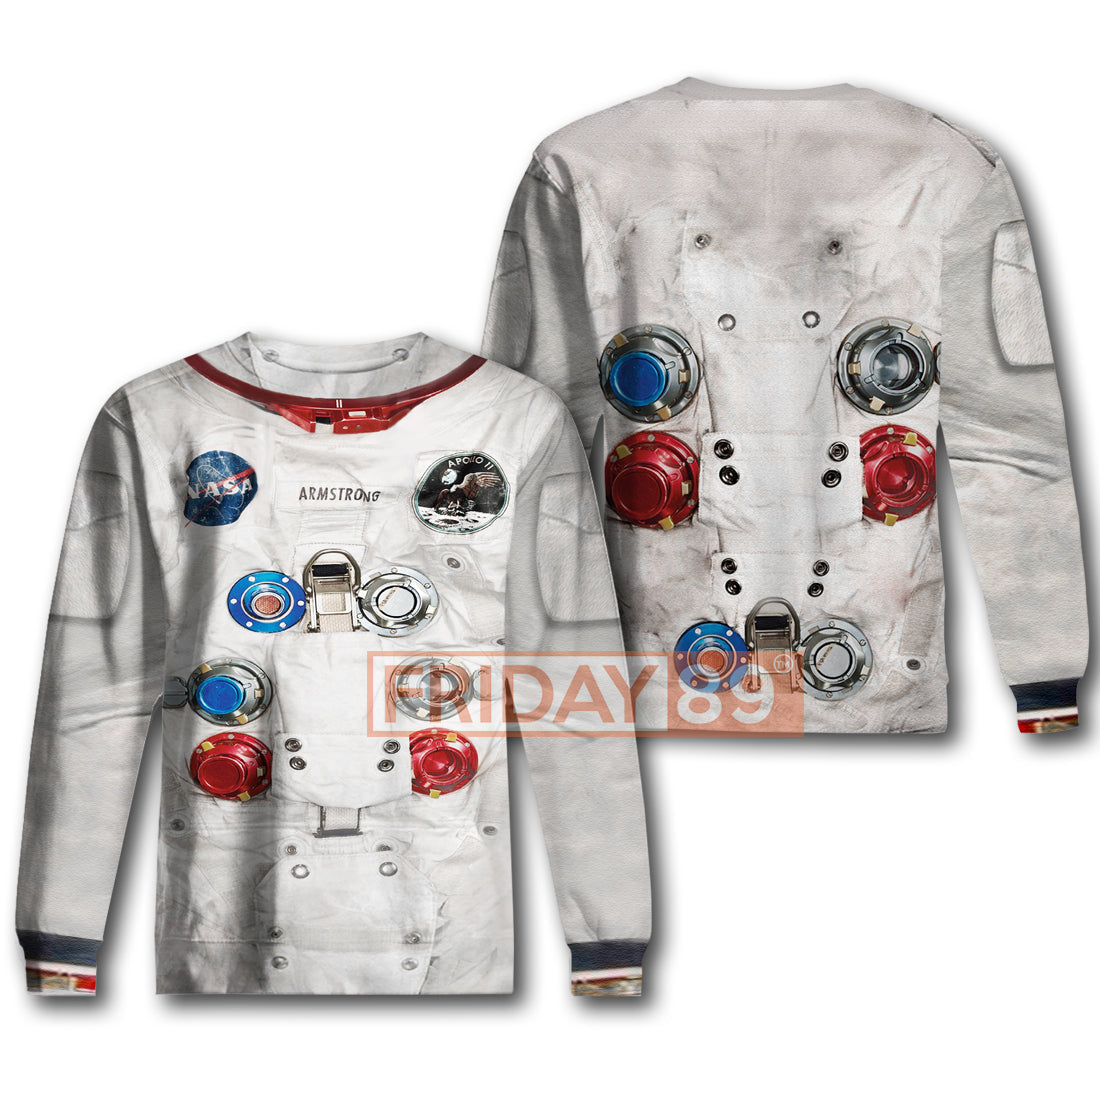 Unifinz Astronaut Suit Hoodies Armstrong Spacesuit Apparel Awesome Astronaut Shirt Sweater 2023